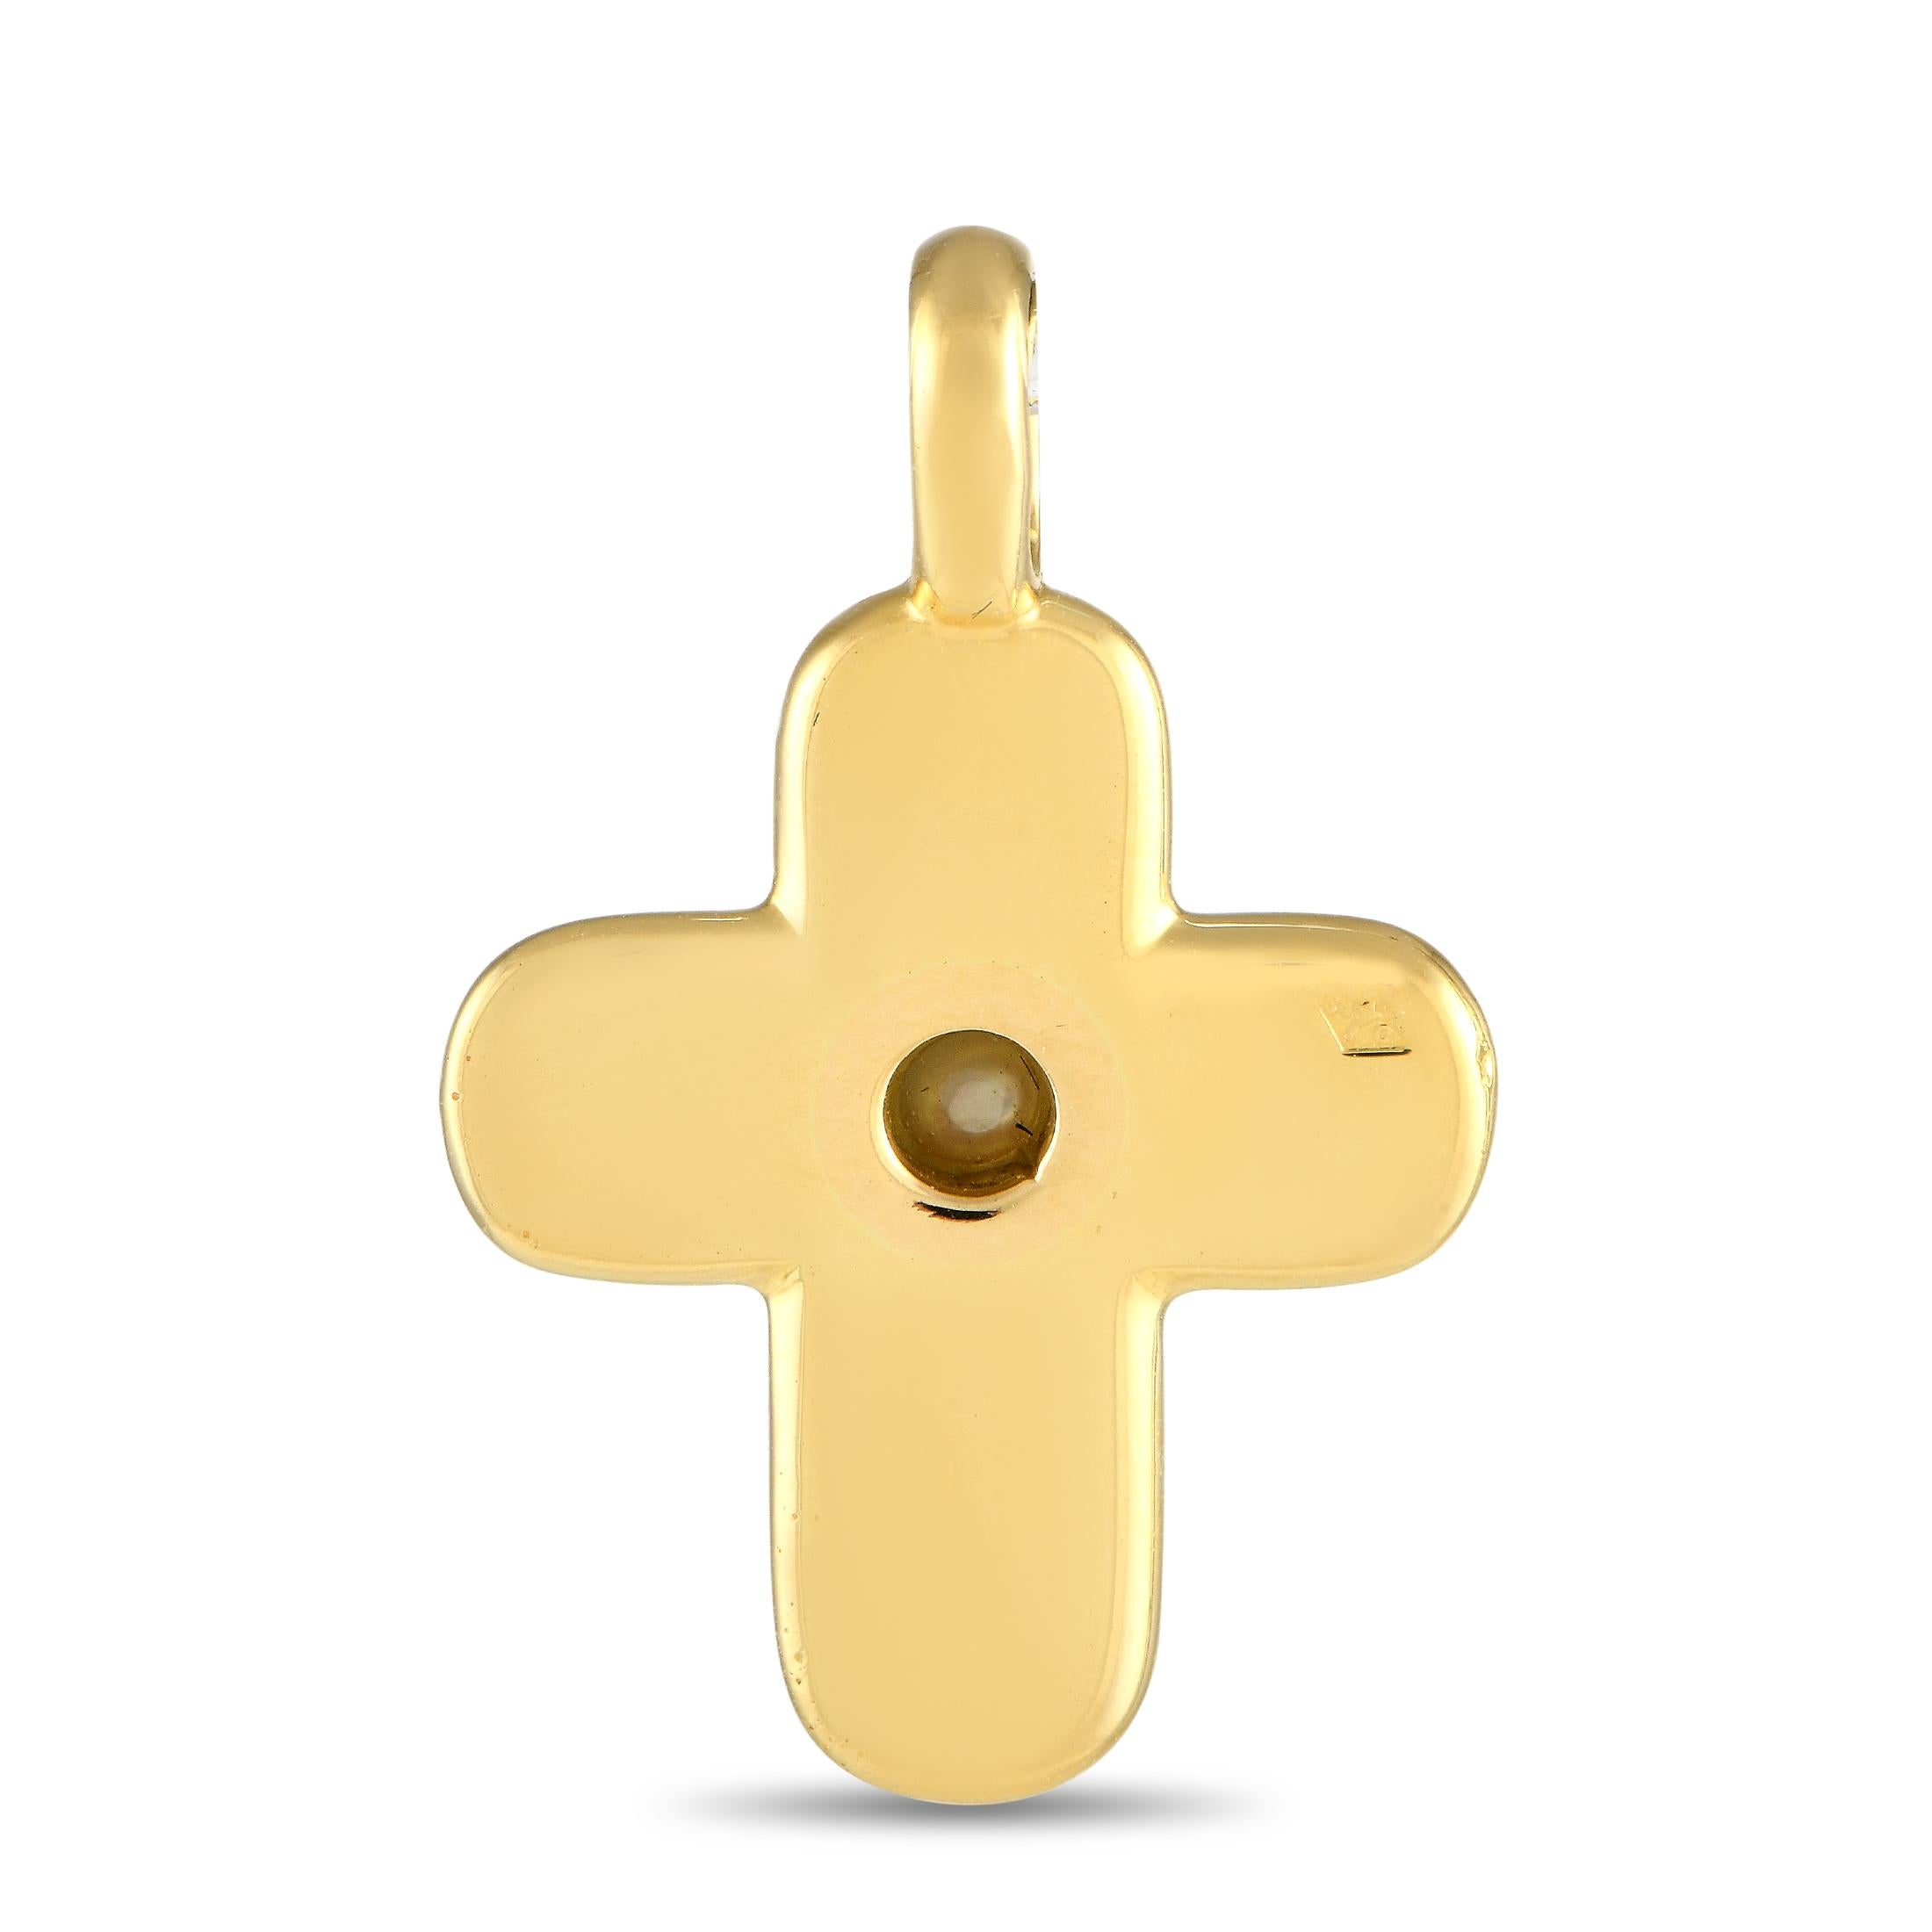 This cross-shaped pendant from Van Cleef & Arpels is unlike anything you have seen before. Rounded edges add a certain sense of charm to this exquisite accessory, which measures 1.0” long by 0.55” wide. It’s crafted from 18K Yellow Gold and includes